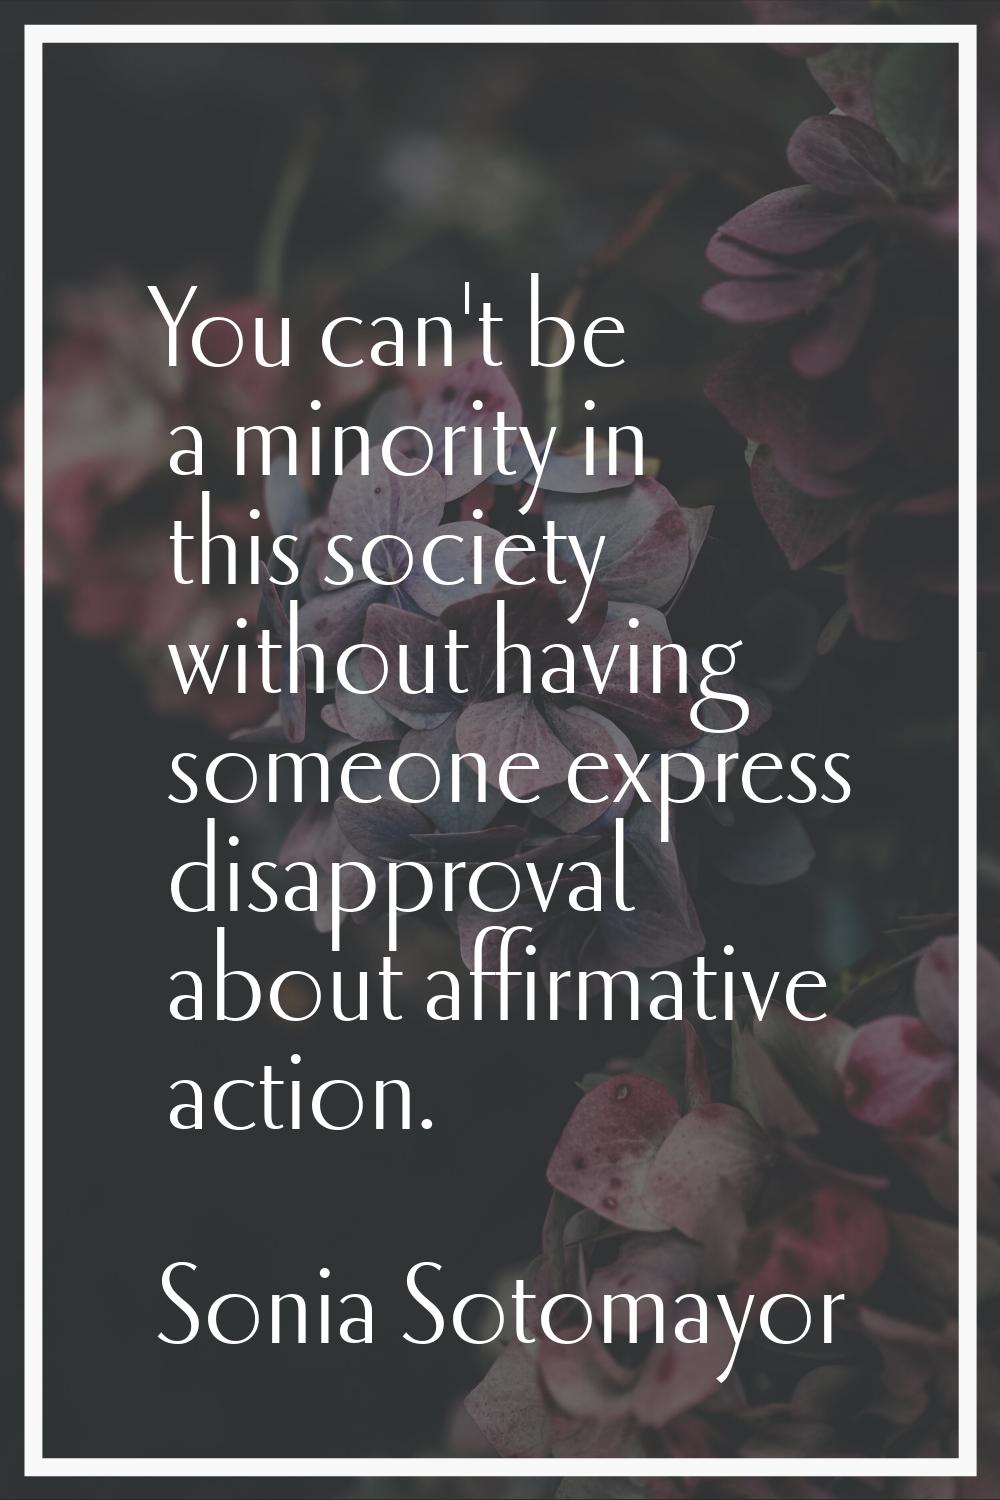 You can't be a minority in this society without having someone express disapproval about affirmativ